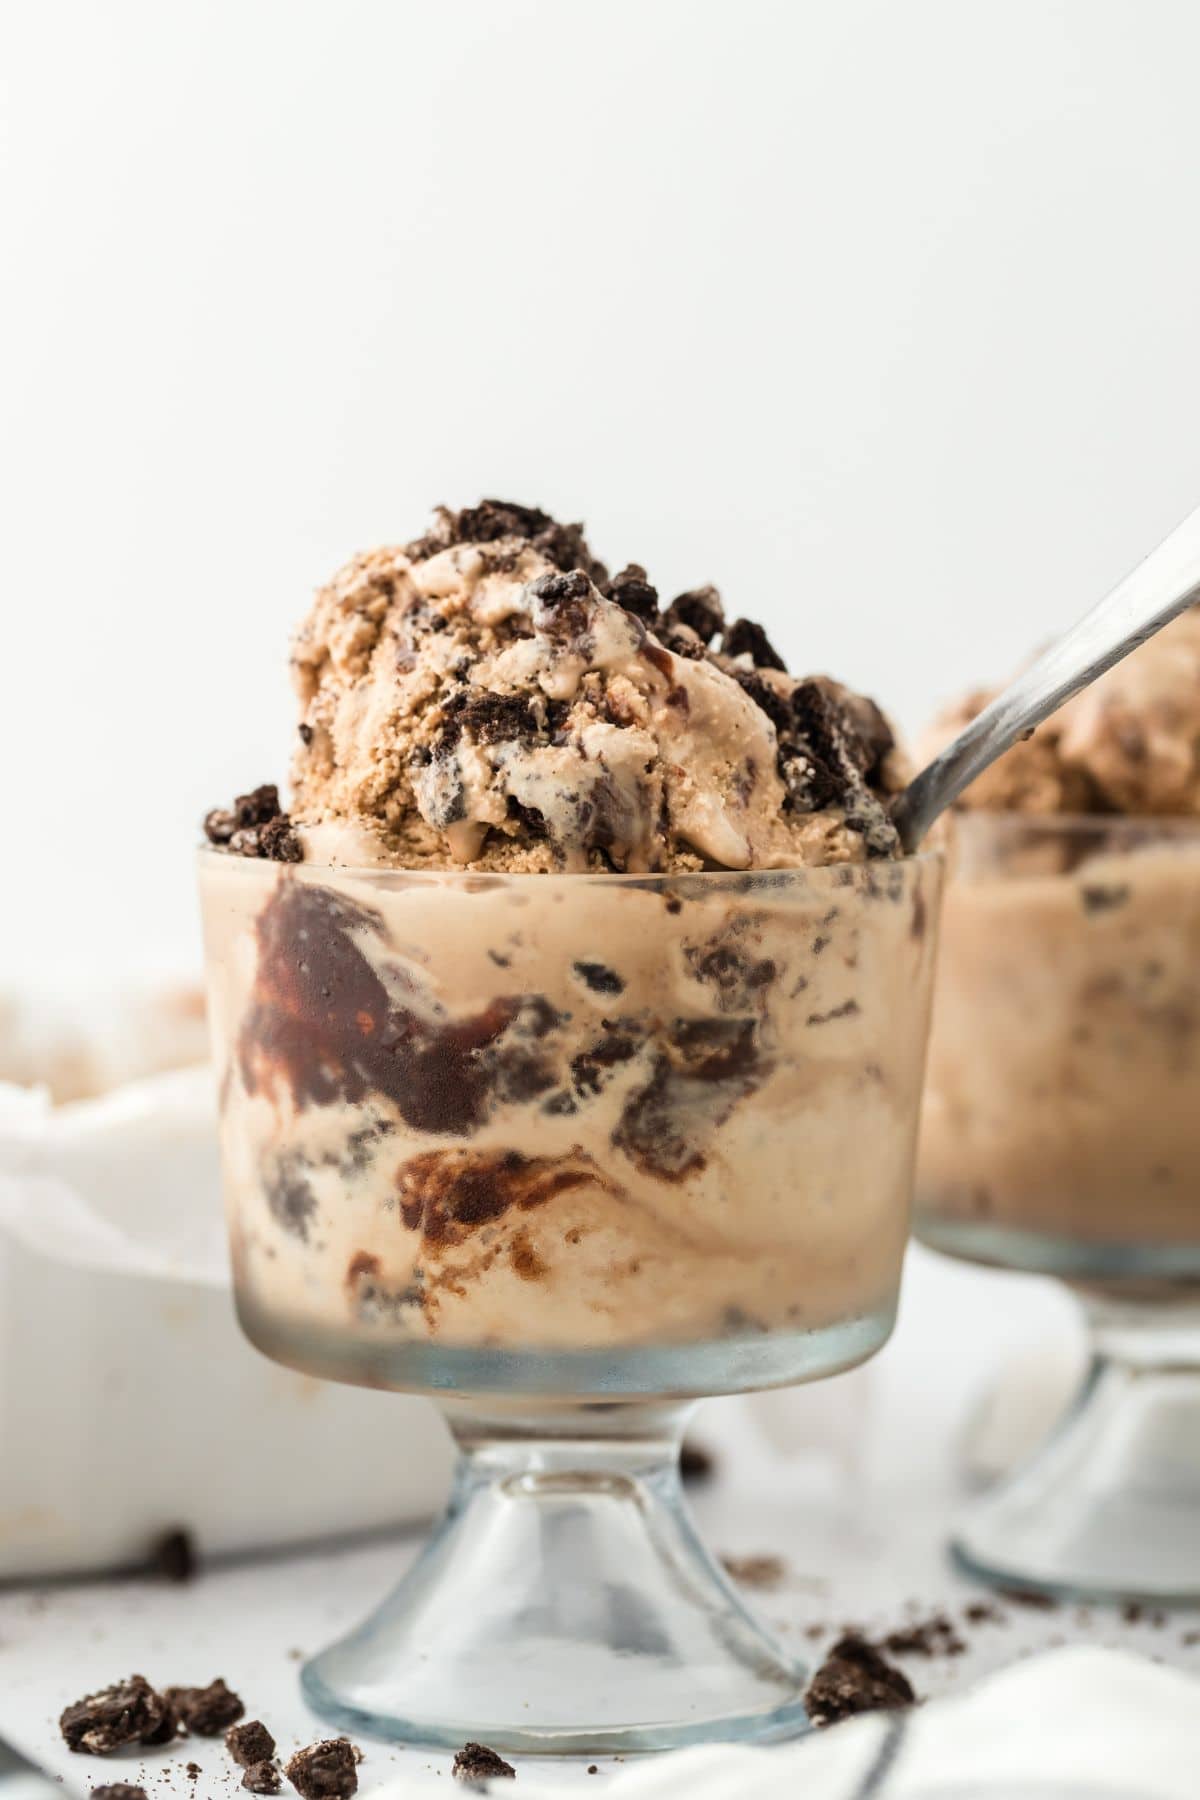 Small glasses filled with scoops of fudge mocha ice cream on the table with a spoon in the glass in the front.